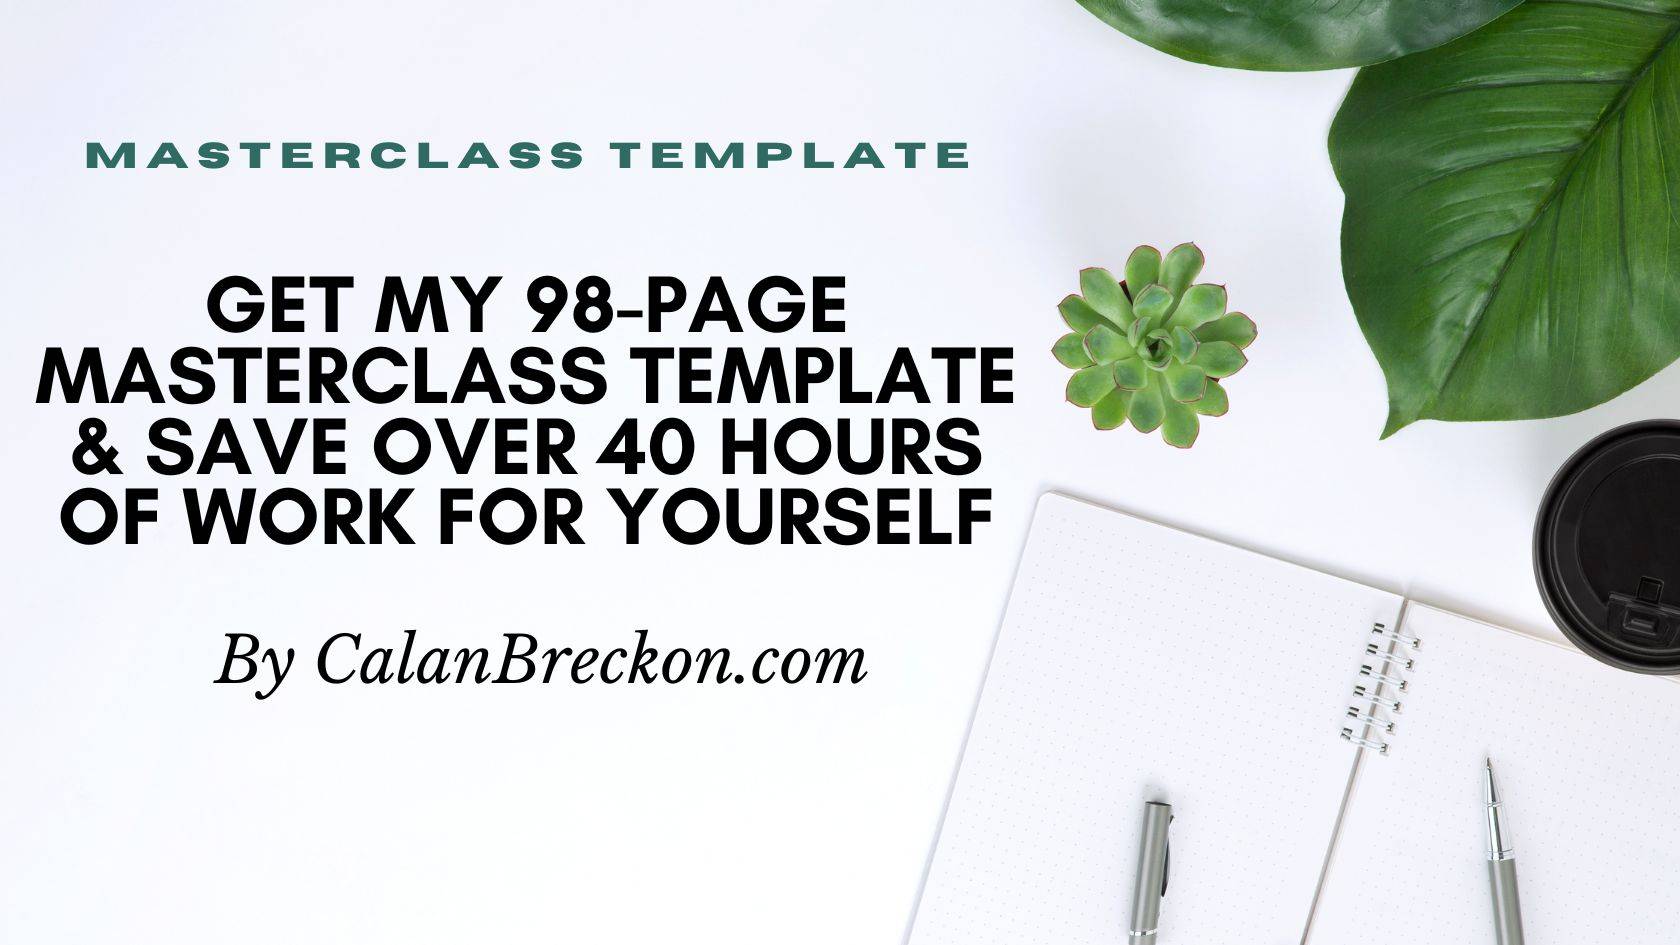 My 98 page Masterclass template that saves you over 40 hours of work!